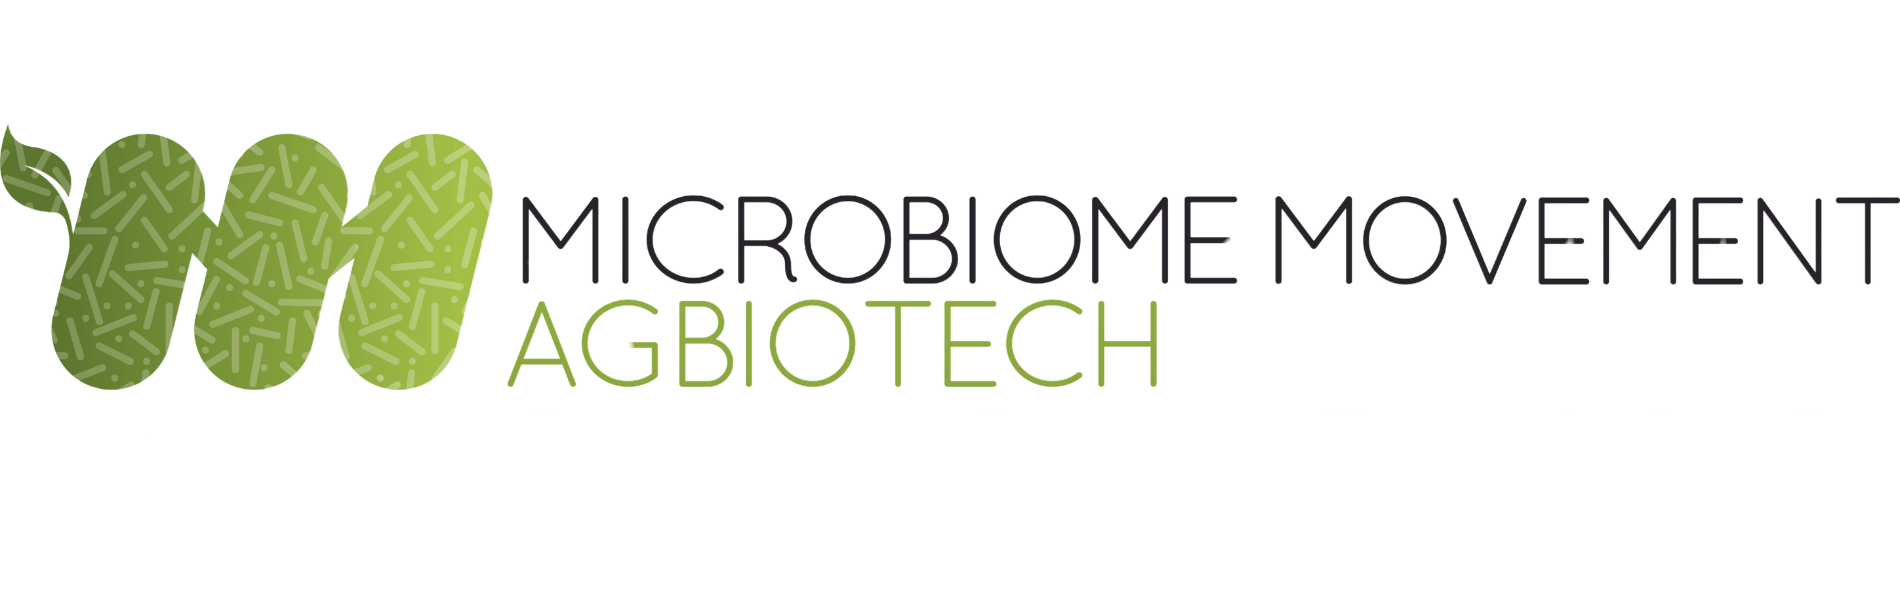 Microbiome Movement - AgBioTech